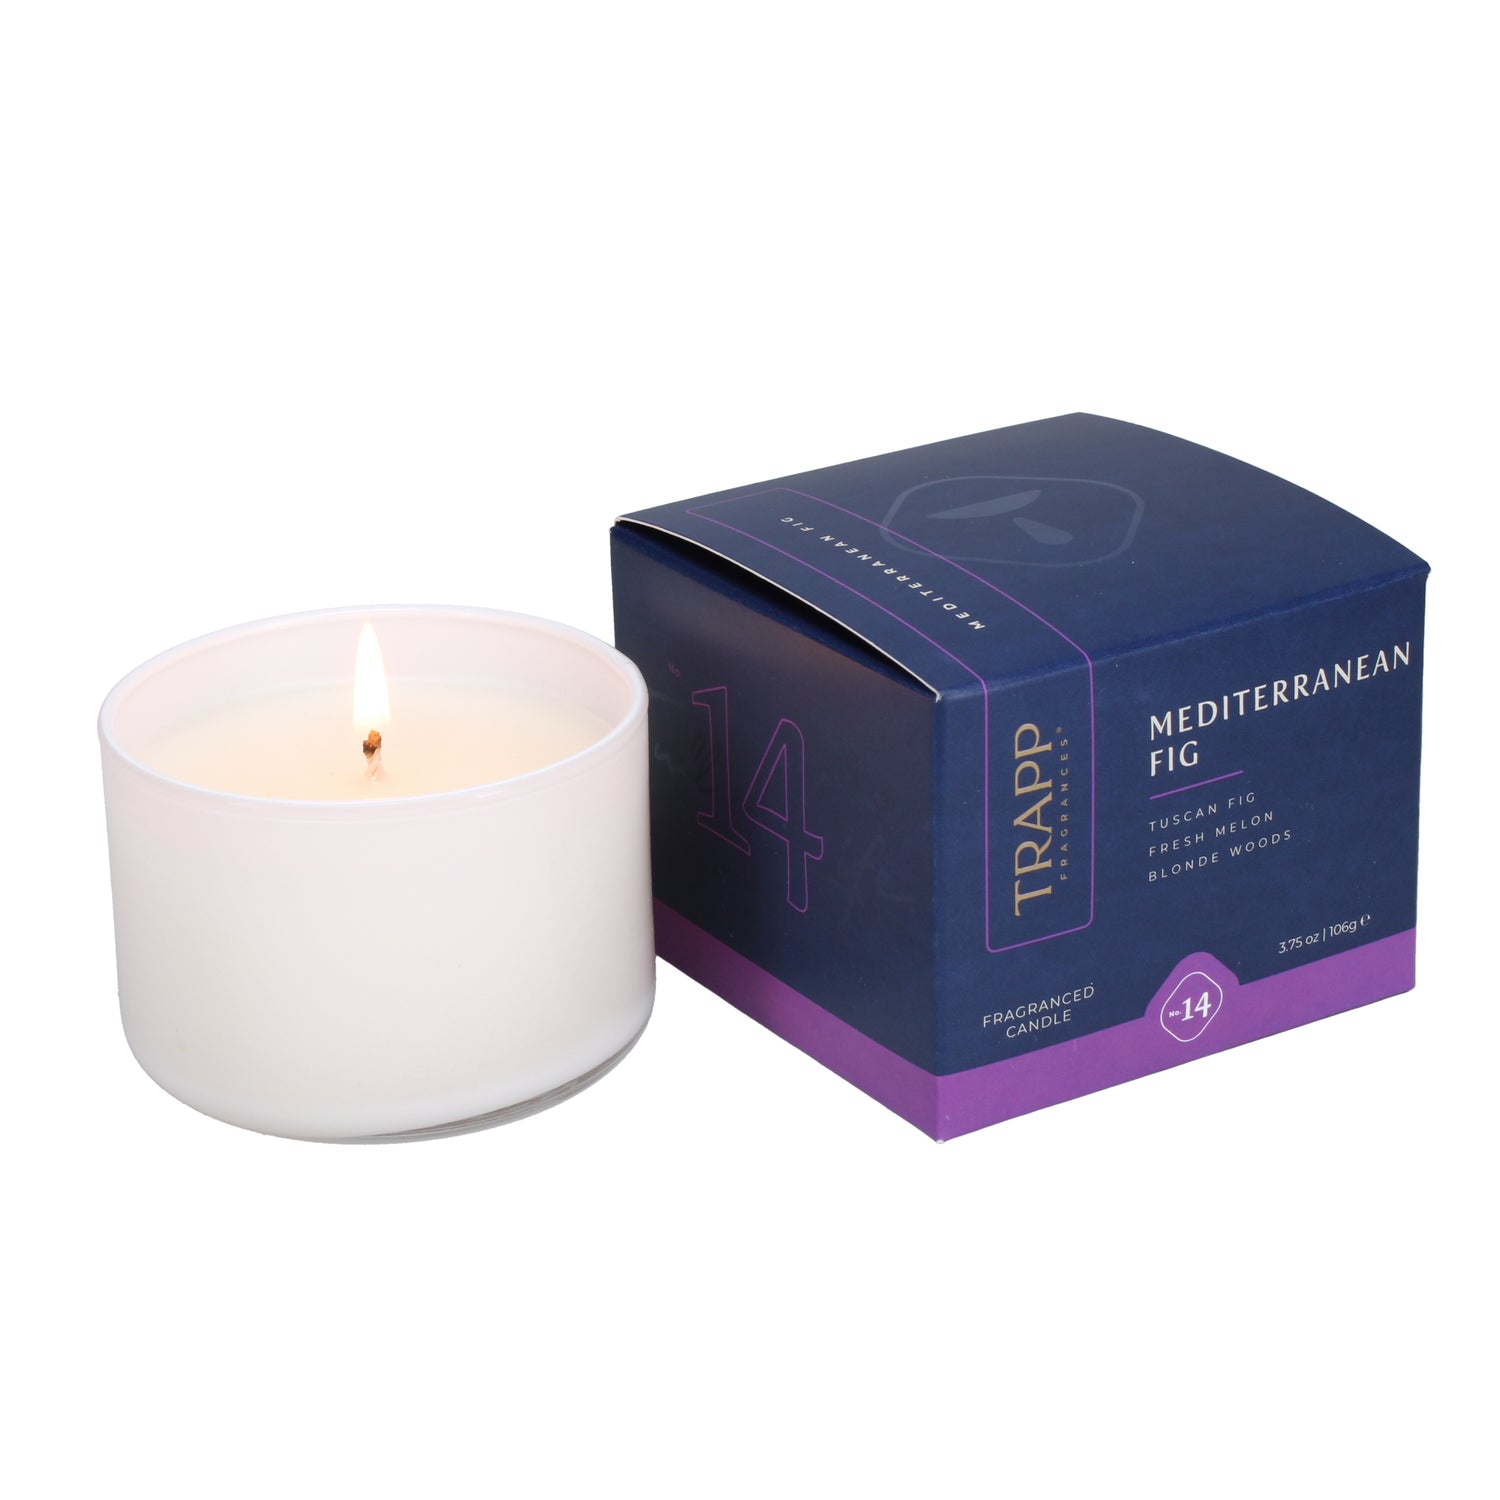 No. 14 Mediterranean Fig 3.75 oz. Small Poured Candle Image 2